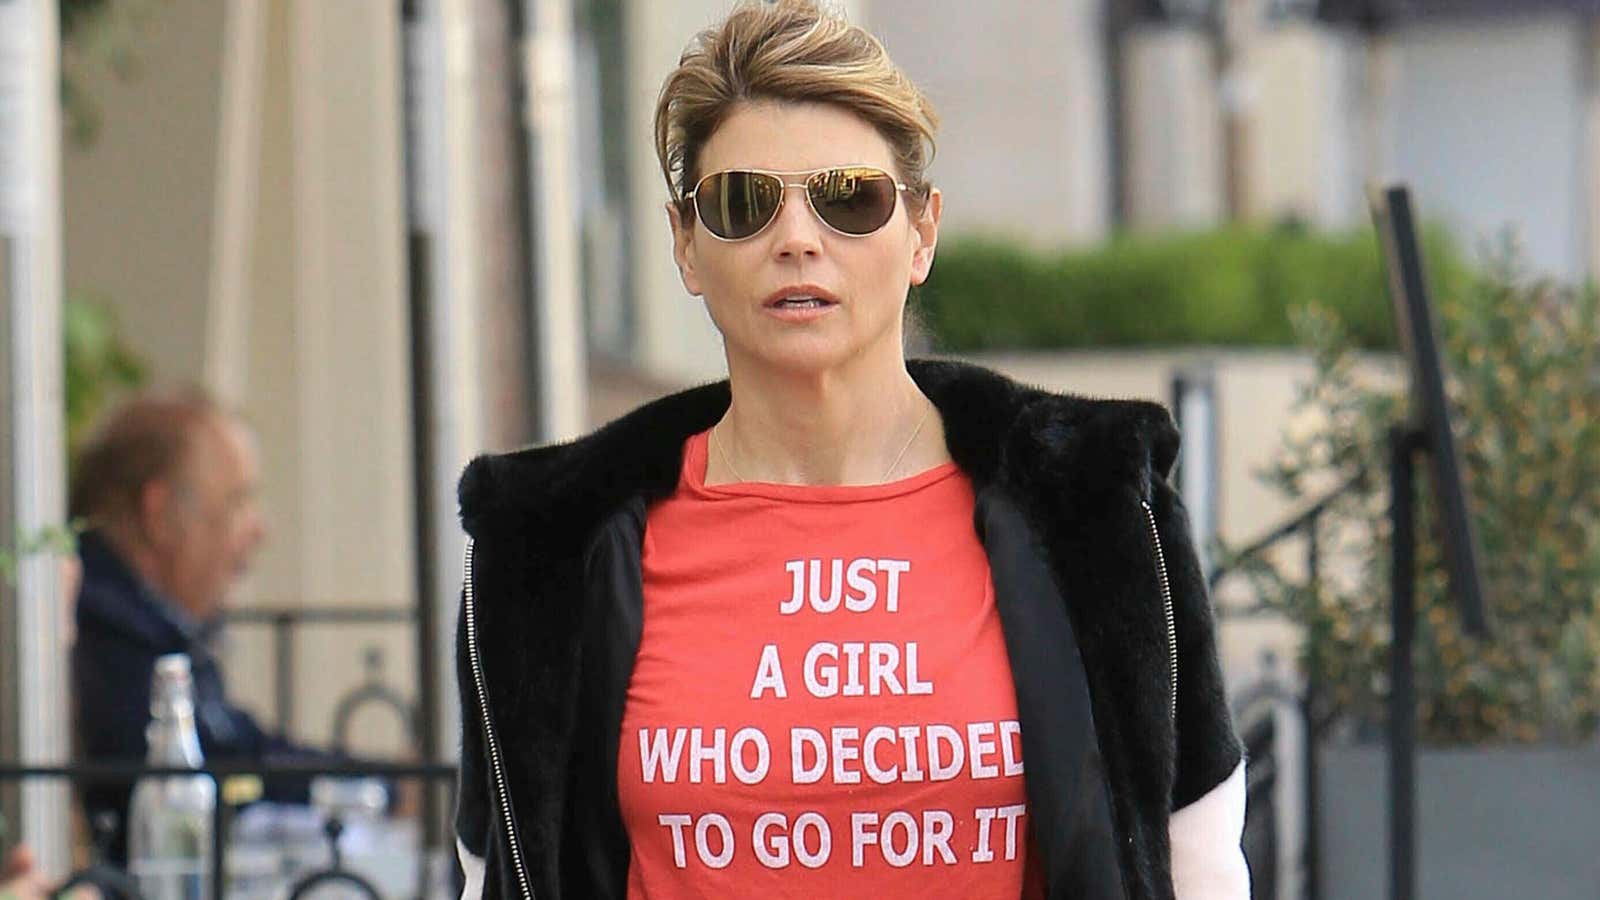 Lori Loughlin, along with 32 other parents, has been been charged with cheating the college admissions process.